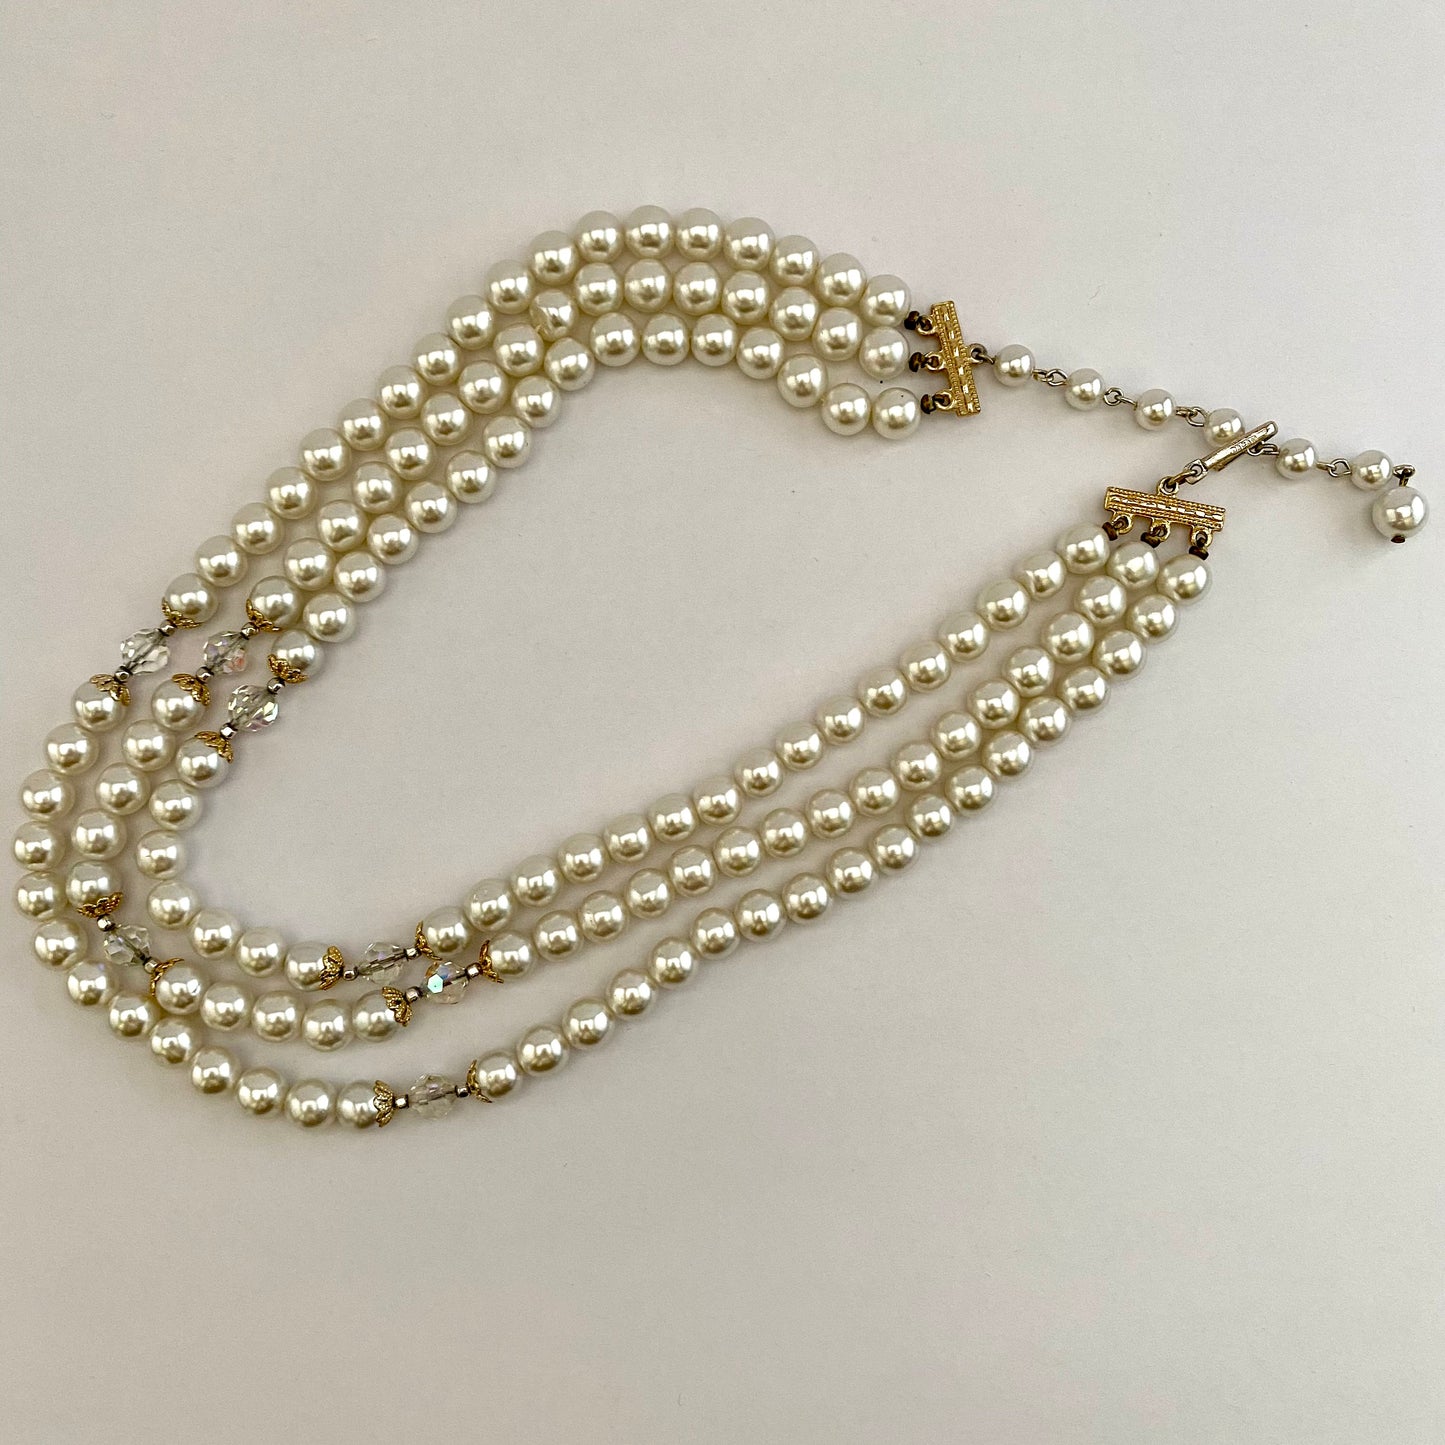 1960s Japan Faux Pearl & Crystal Bead Necklace